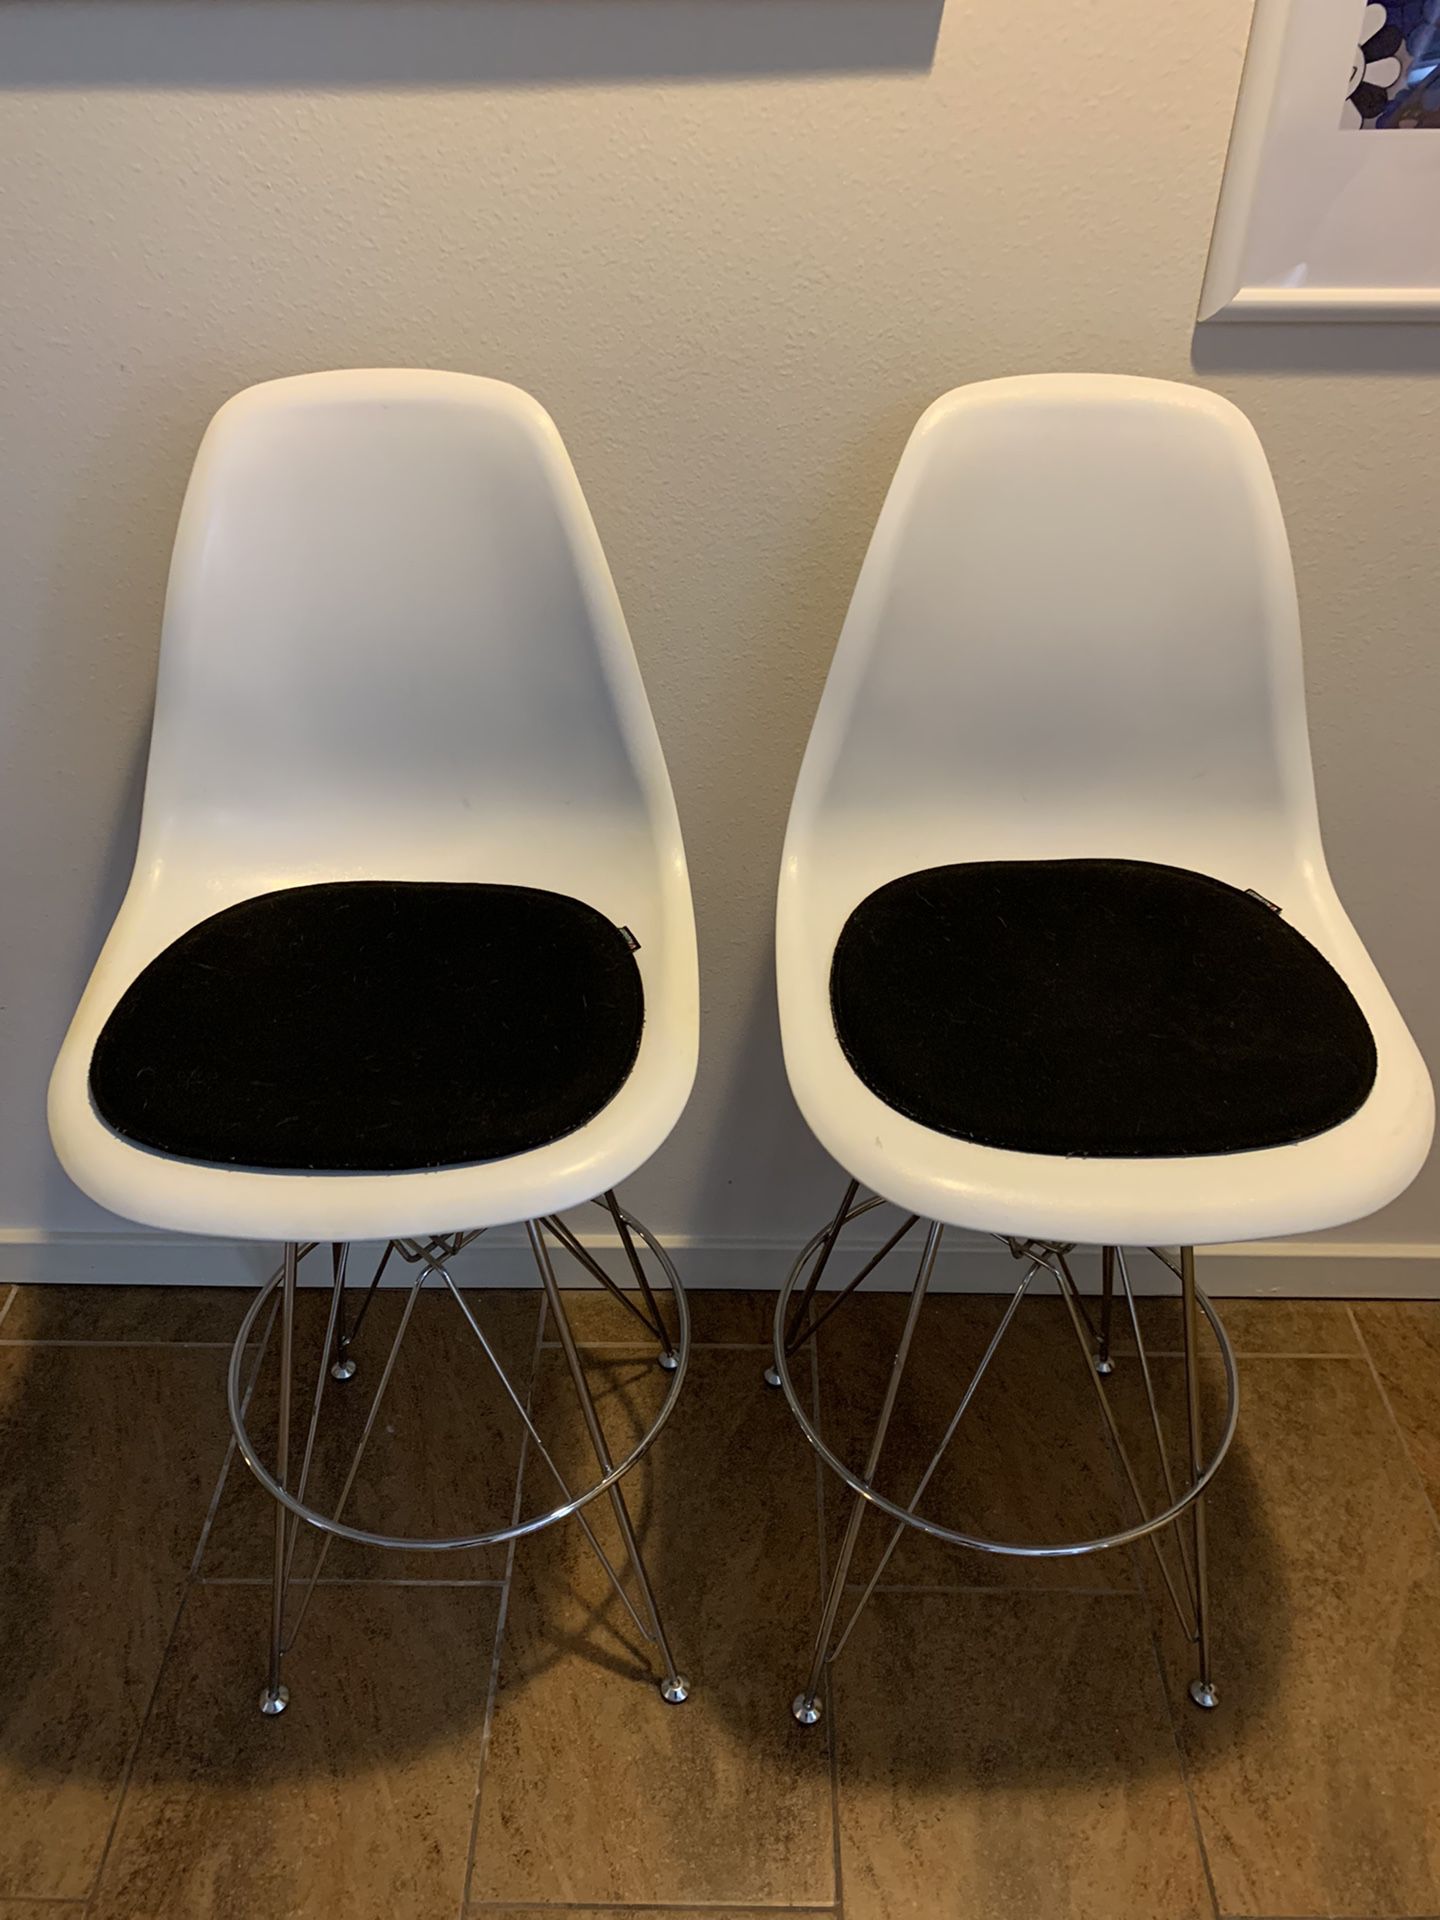 Set of 2 Mid Century Modern Eames Style Bar Stool Chairs Black and White